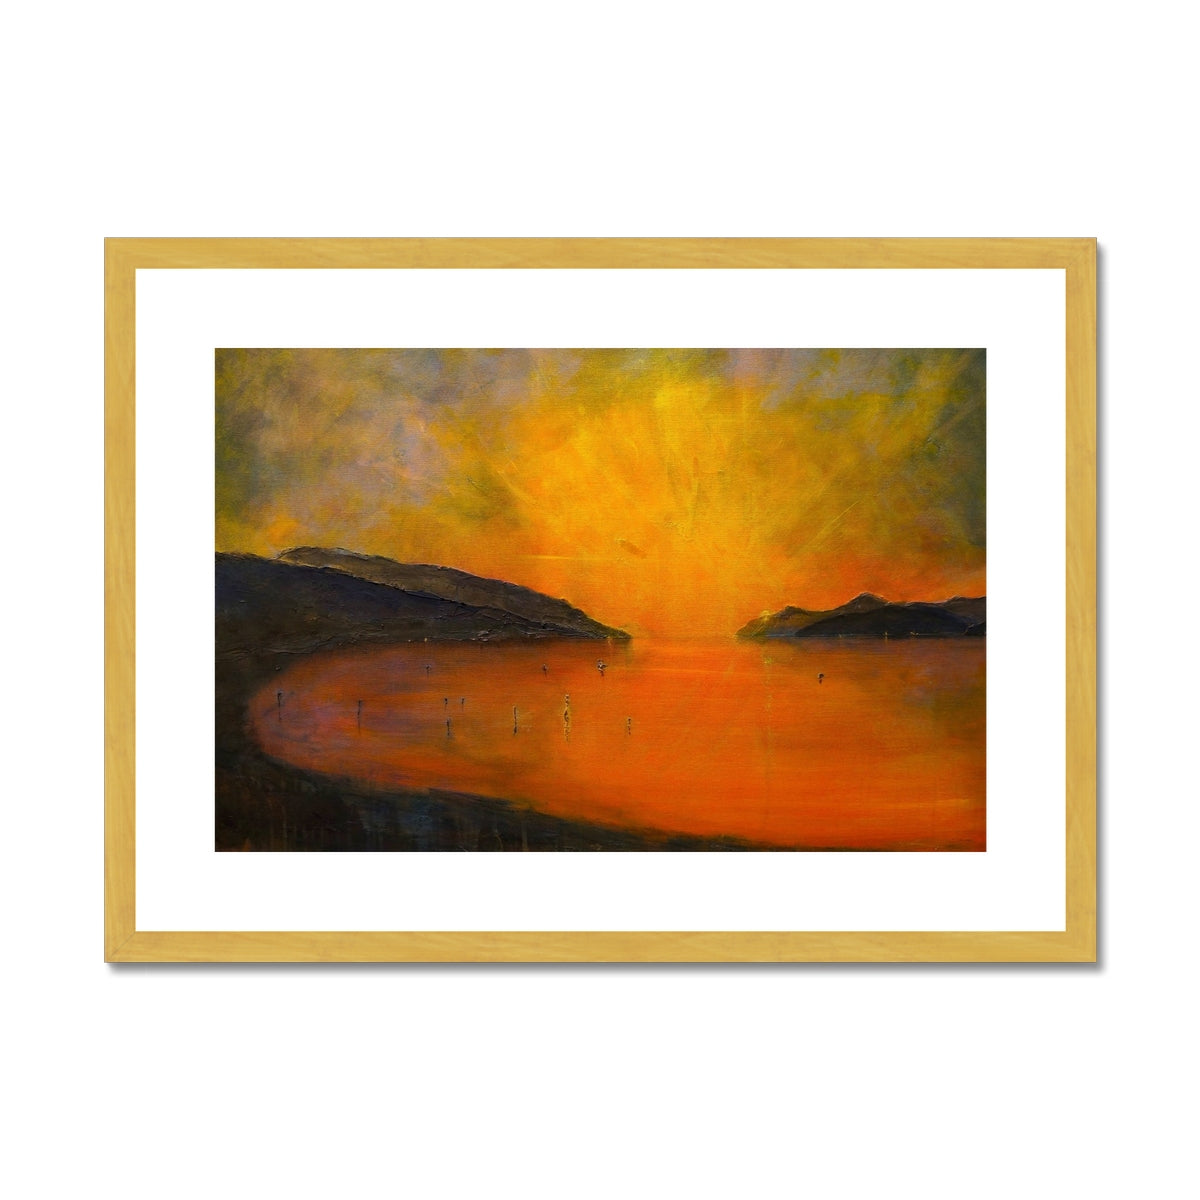 Loch Ness Sunset Painting | Antique Framed & Mounted Prints From Scotland-Antique Framed & Mounted Prints-Scottish Lochs & Mountains Art Gallery-A2 Landscape-Gold Frame-Paintings, Prints, Homeware, Art Gifts From Scotland By Scottish Artist Kevin Hunter